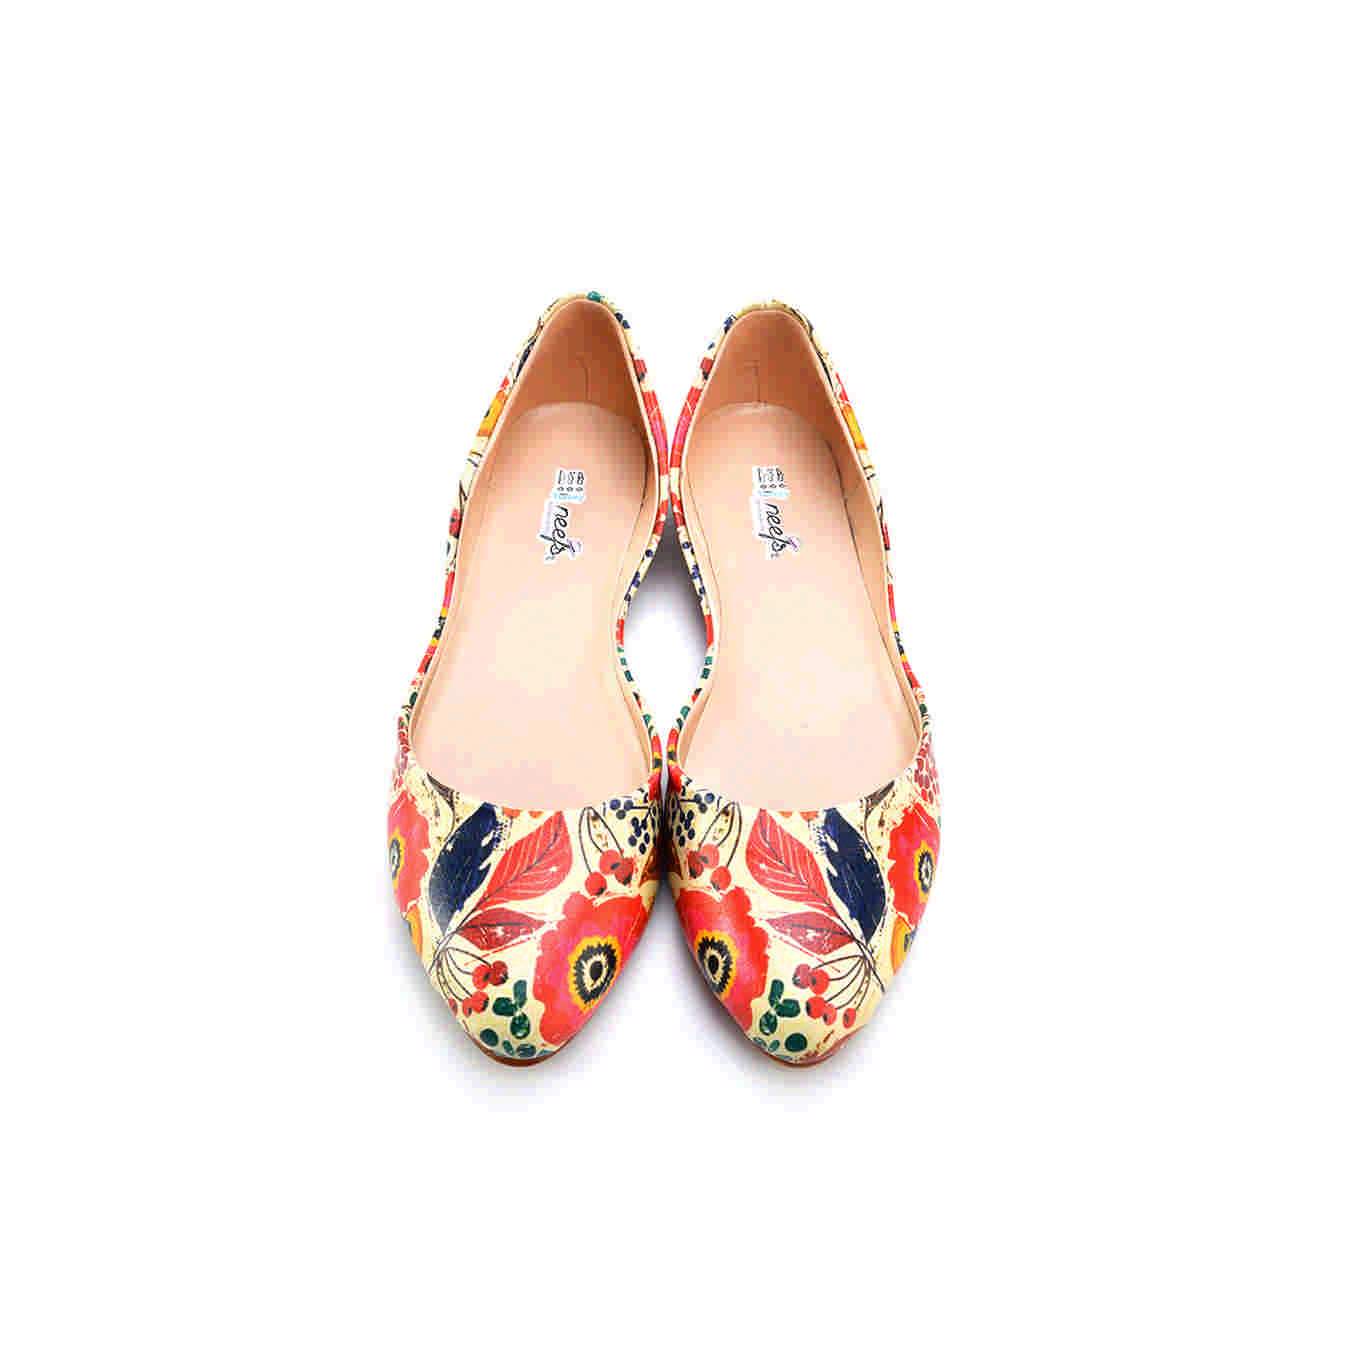 Ballerinas Shoes NSS363 (1891147481184)